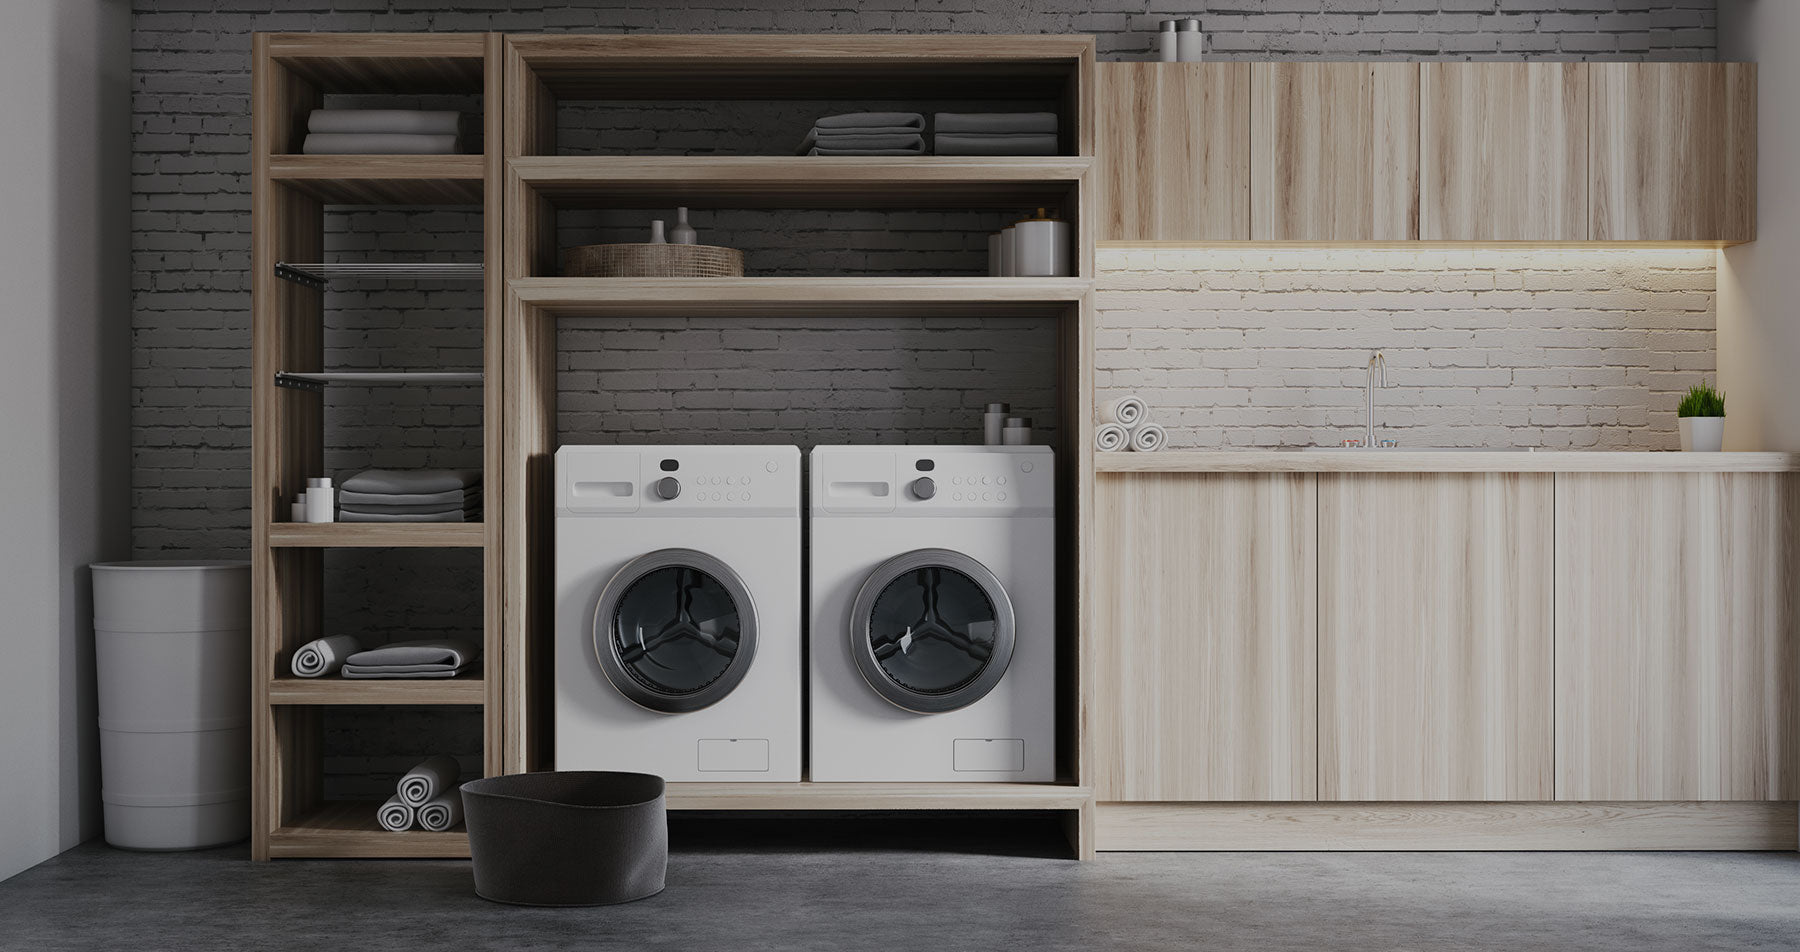 5 Laundry Room Storage Ideas You'll Wish You'd Thought Of! – Docking Drawer